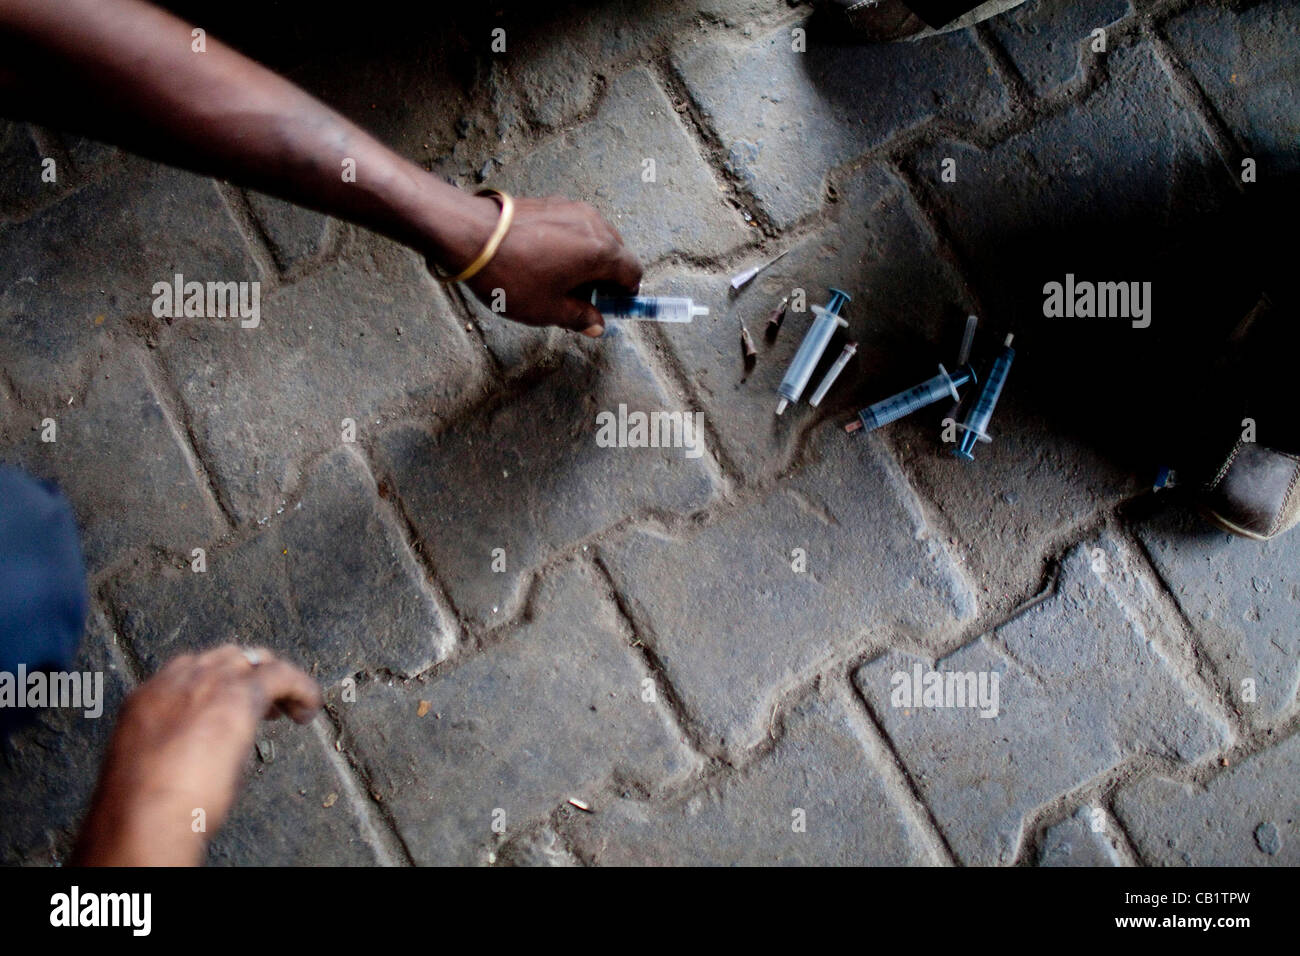 May 16, 2012 - New Delhi, India - A drug addict places his used needle on the ground in order to receive a new one from NGO outreach workers in the Yamuna Bazaar. Approximately 1,200 drug addicts live on the streets in the bazaar, an area that is approximately two kilometers by two kilometers. (Cred Stock Photo